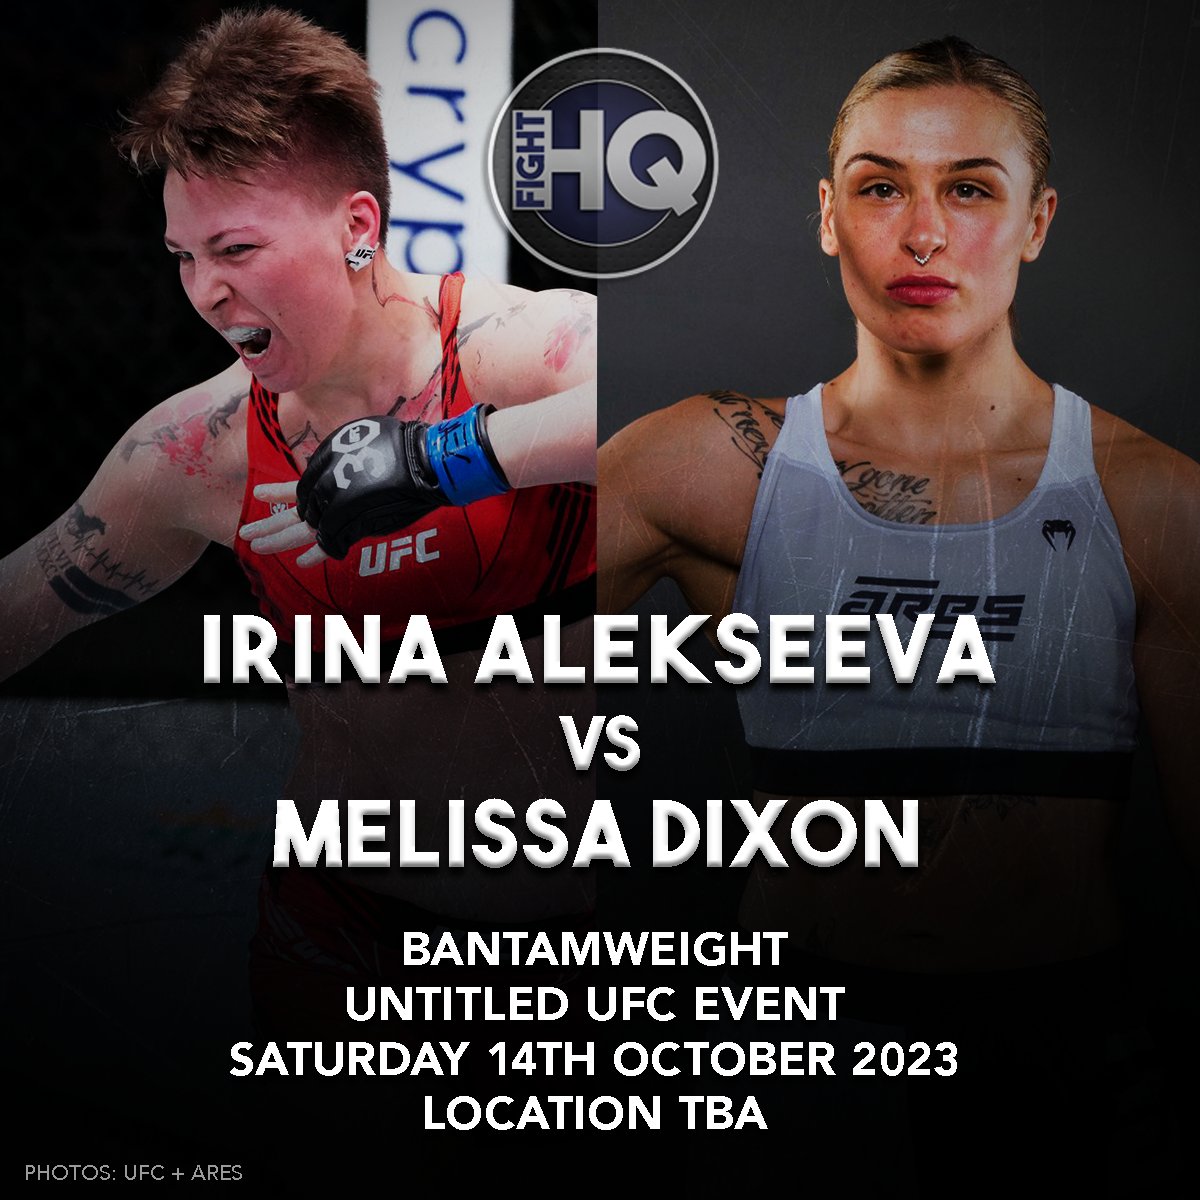 An October 14th UFC event will feature the promotional debut of unbeaten bantamweight prospect @NomessMMA 🏴󠁧󠁢󠁥󠁮󠁧󠁿 when she takes on Irina Alekseeva 🇷🇺 (per @MMAFighting) #MMATwitter